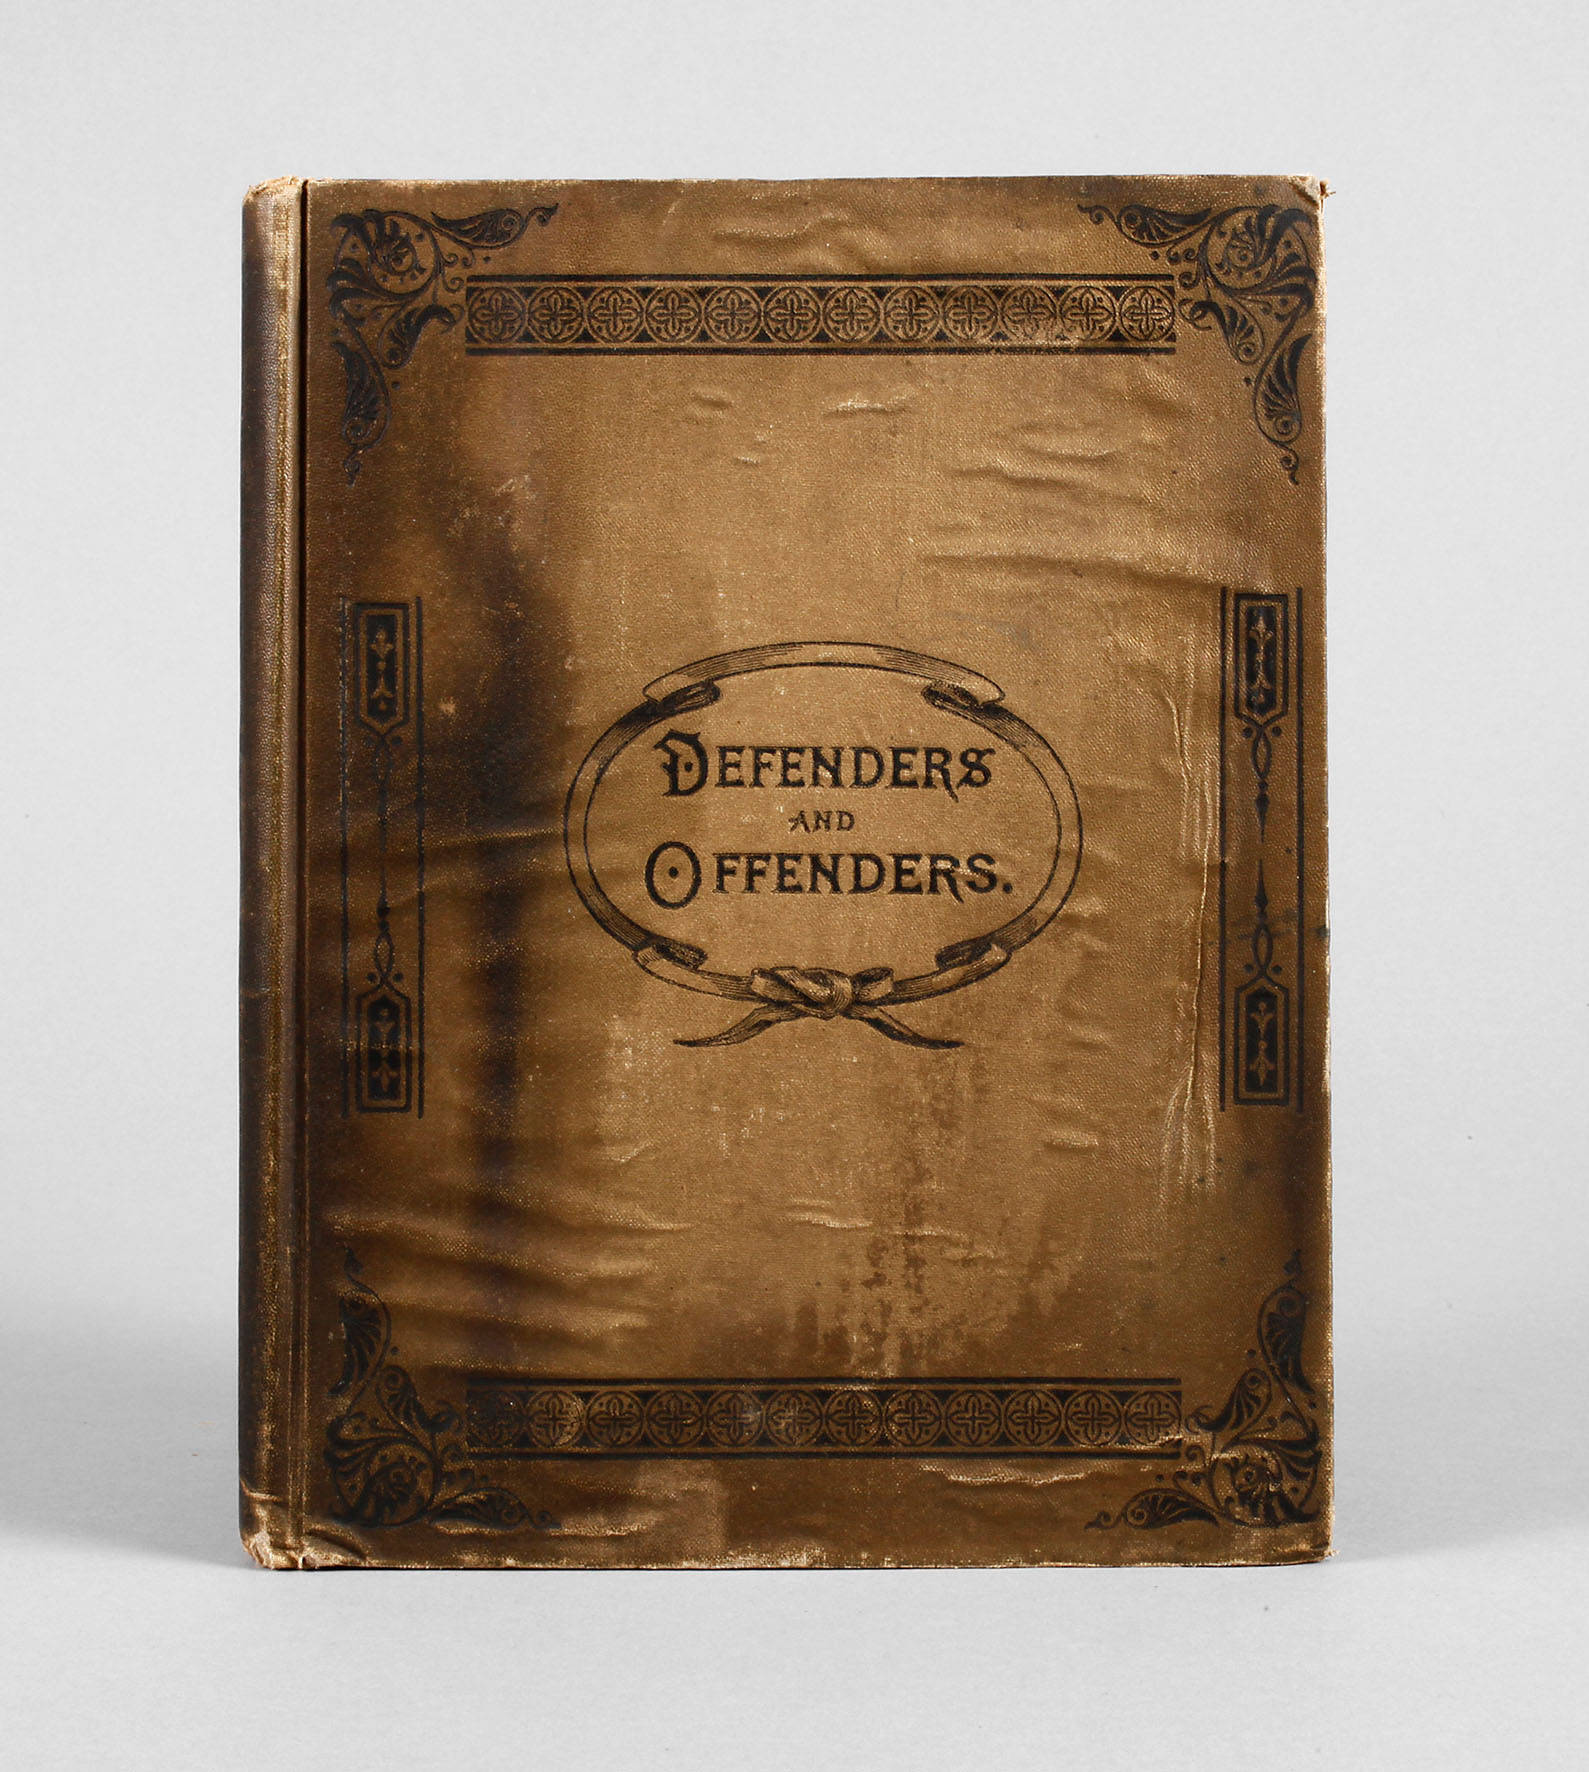 Defenders and Offenders 1888